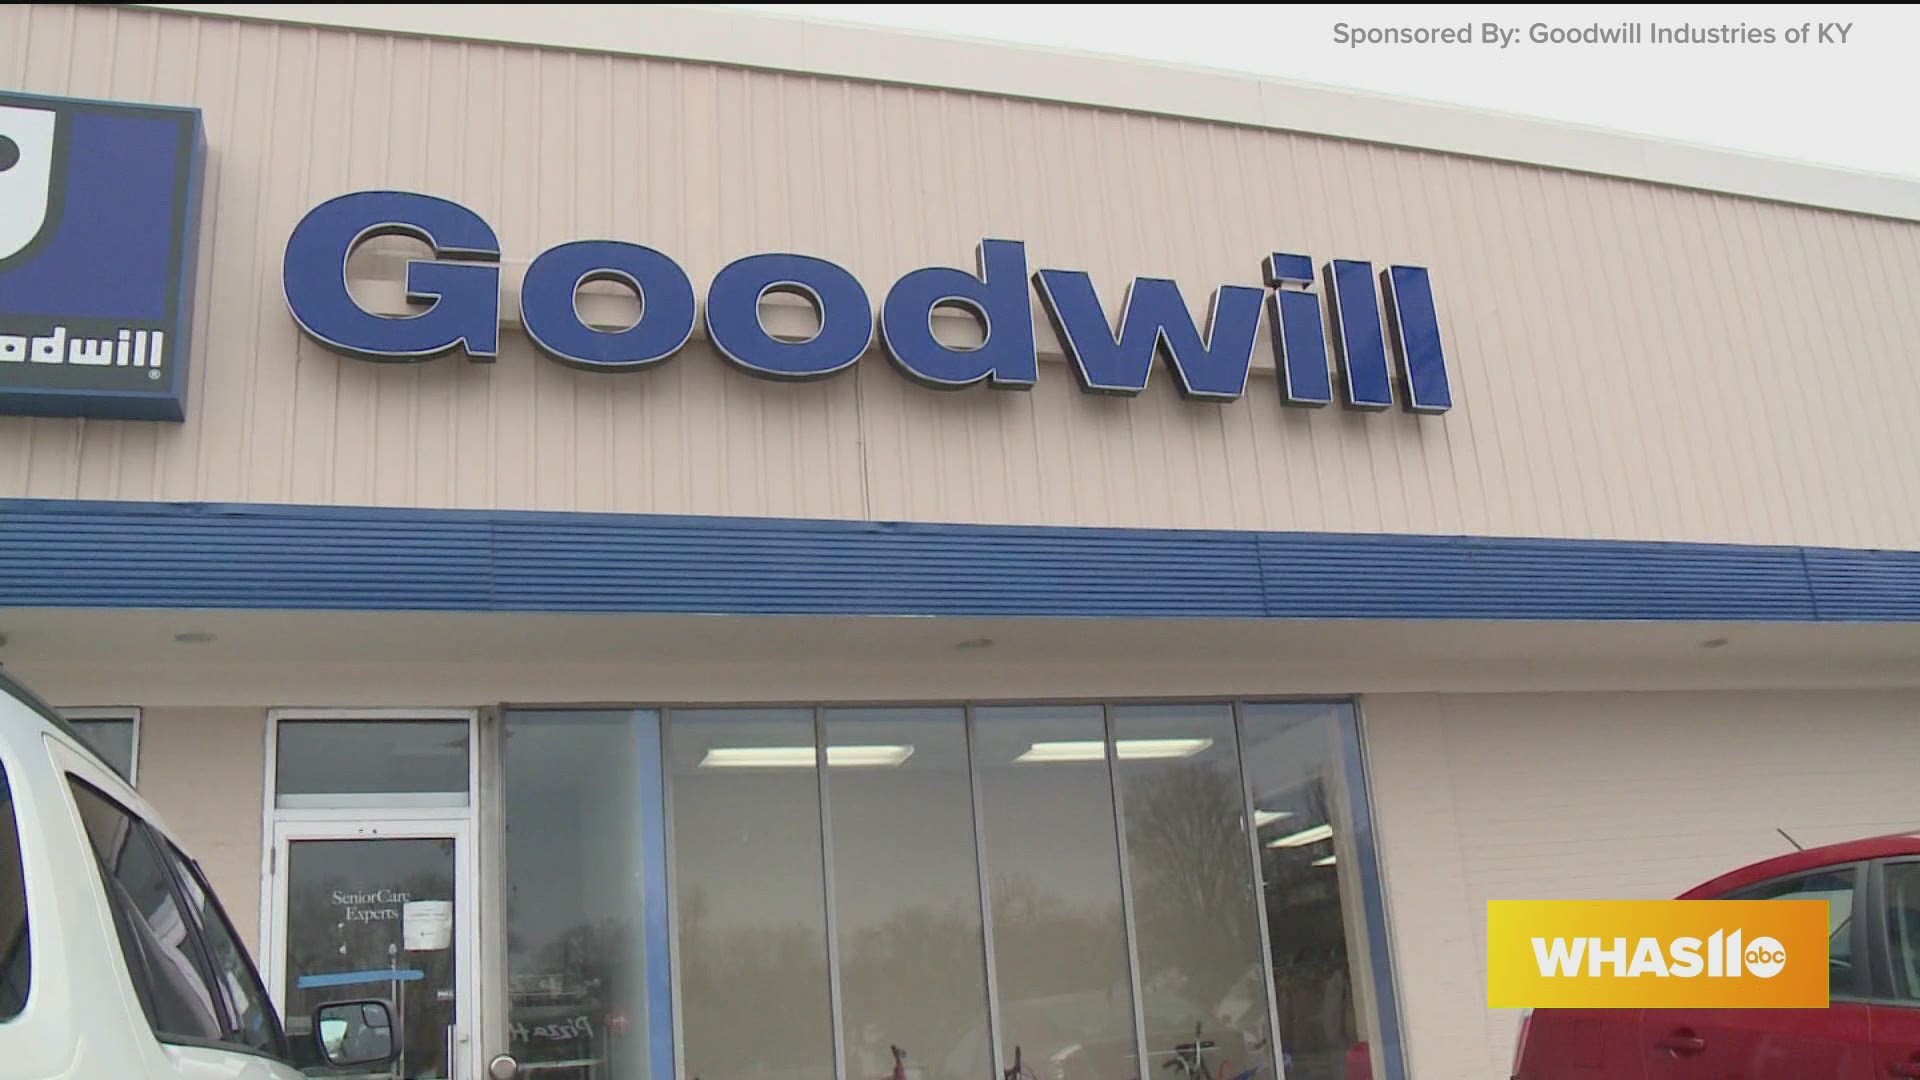 To learn more about the Goodwill Industries of Kentucky or find a location near you, visit GoodwillKY.org.